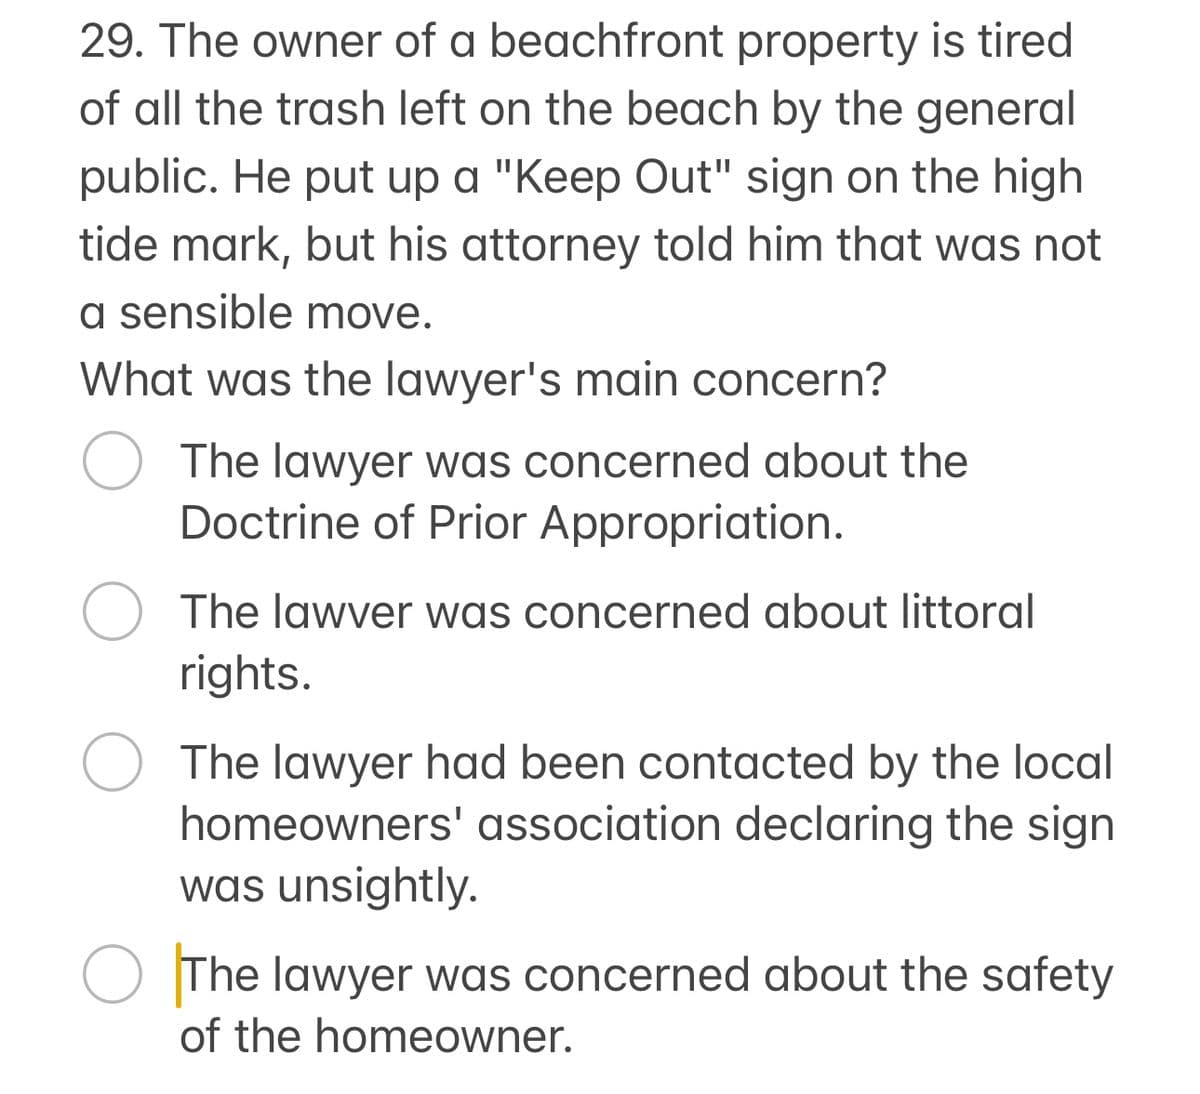 29. The owner of a beachfront property is tired
of all the trash left on the beach by the general
public. He put up a "Keep Out" sign on the high
tide mark, but his attorney told him that was not
a sensible move.
What was the lawyer's main concern?
○ The lawyer was concerned about the
Doctrine of Prior Appropriation.
○ The lawver was concerned about littoral
rights.
The lawyer had been contacted by the local
homeowners' association declaring the sign
was unsightly.
The lawyer was concerned about the safety
of the homeowner.